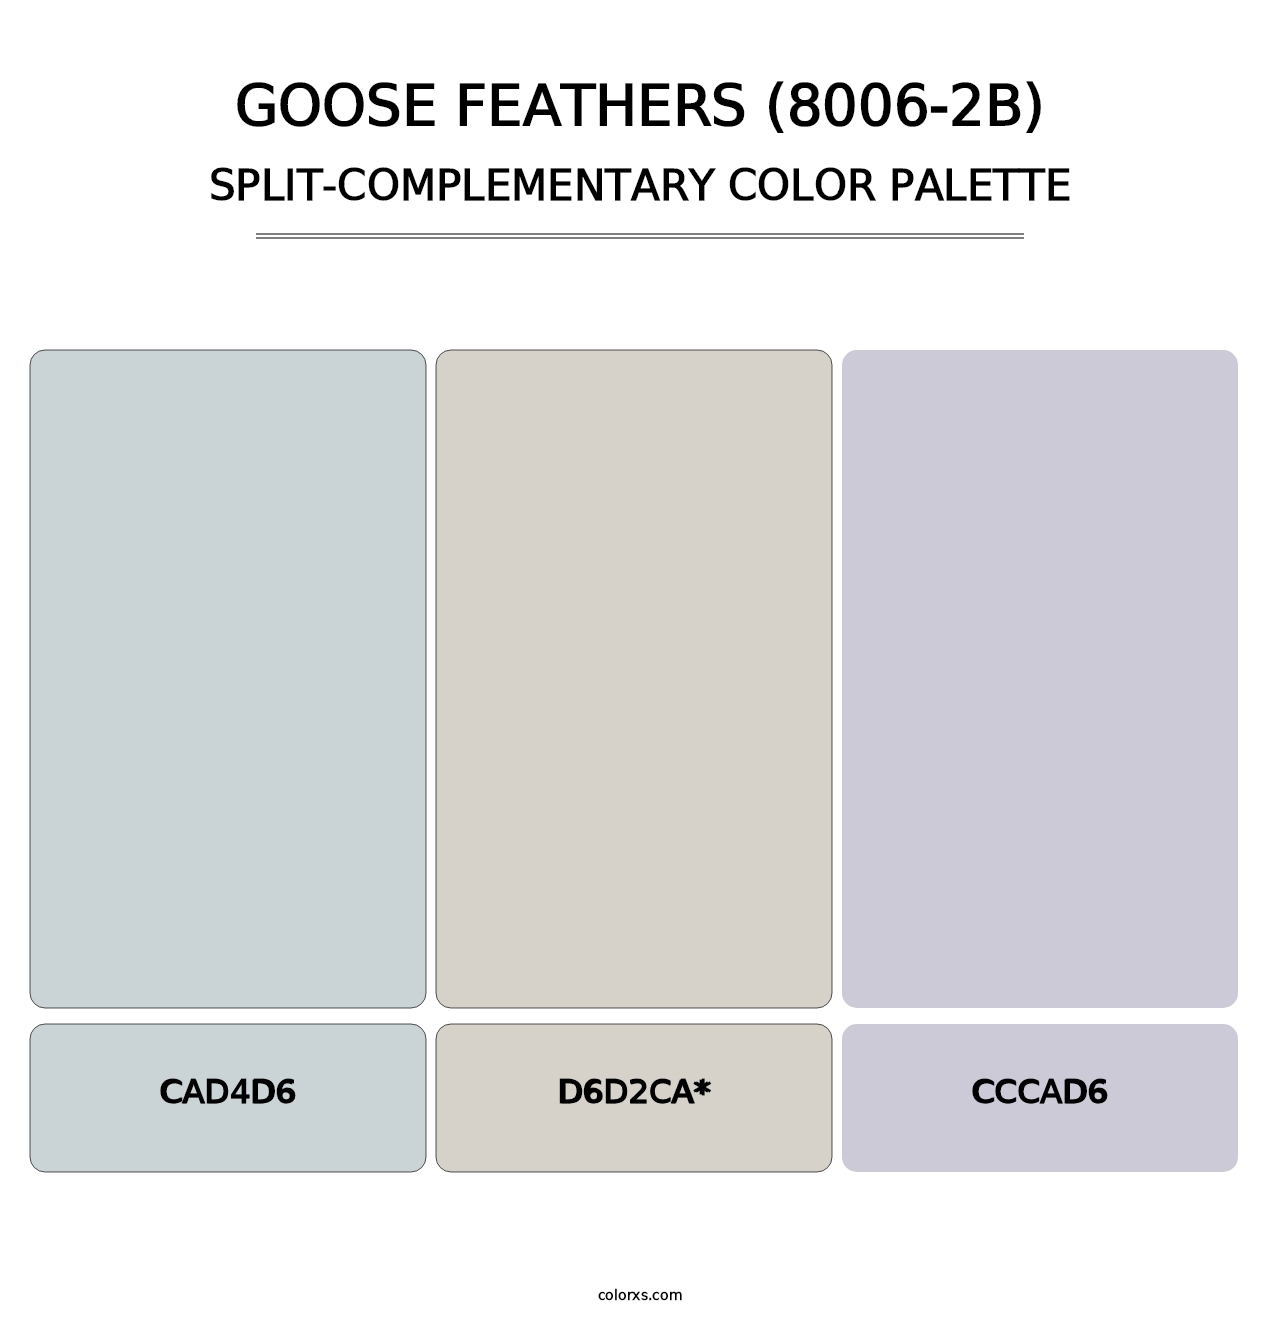 Goose Feathers (8006-2B) - Split-Complementary Color Palette